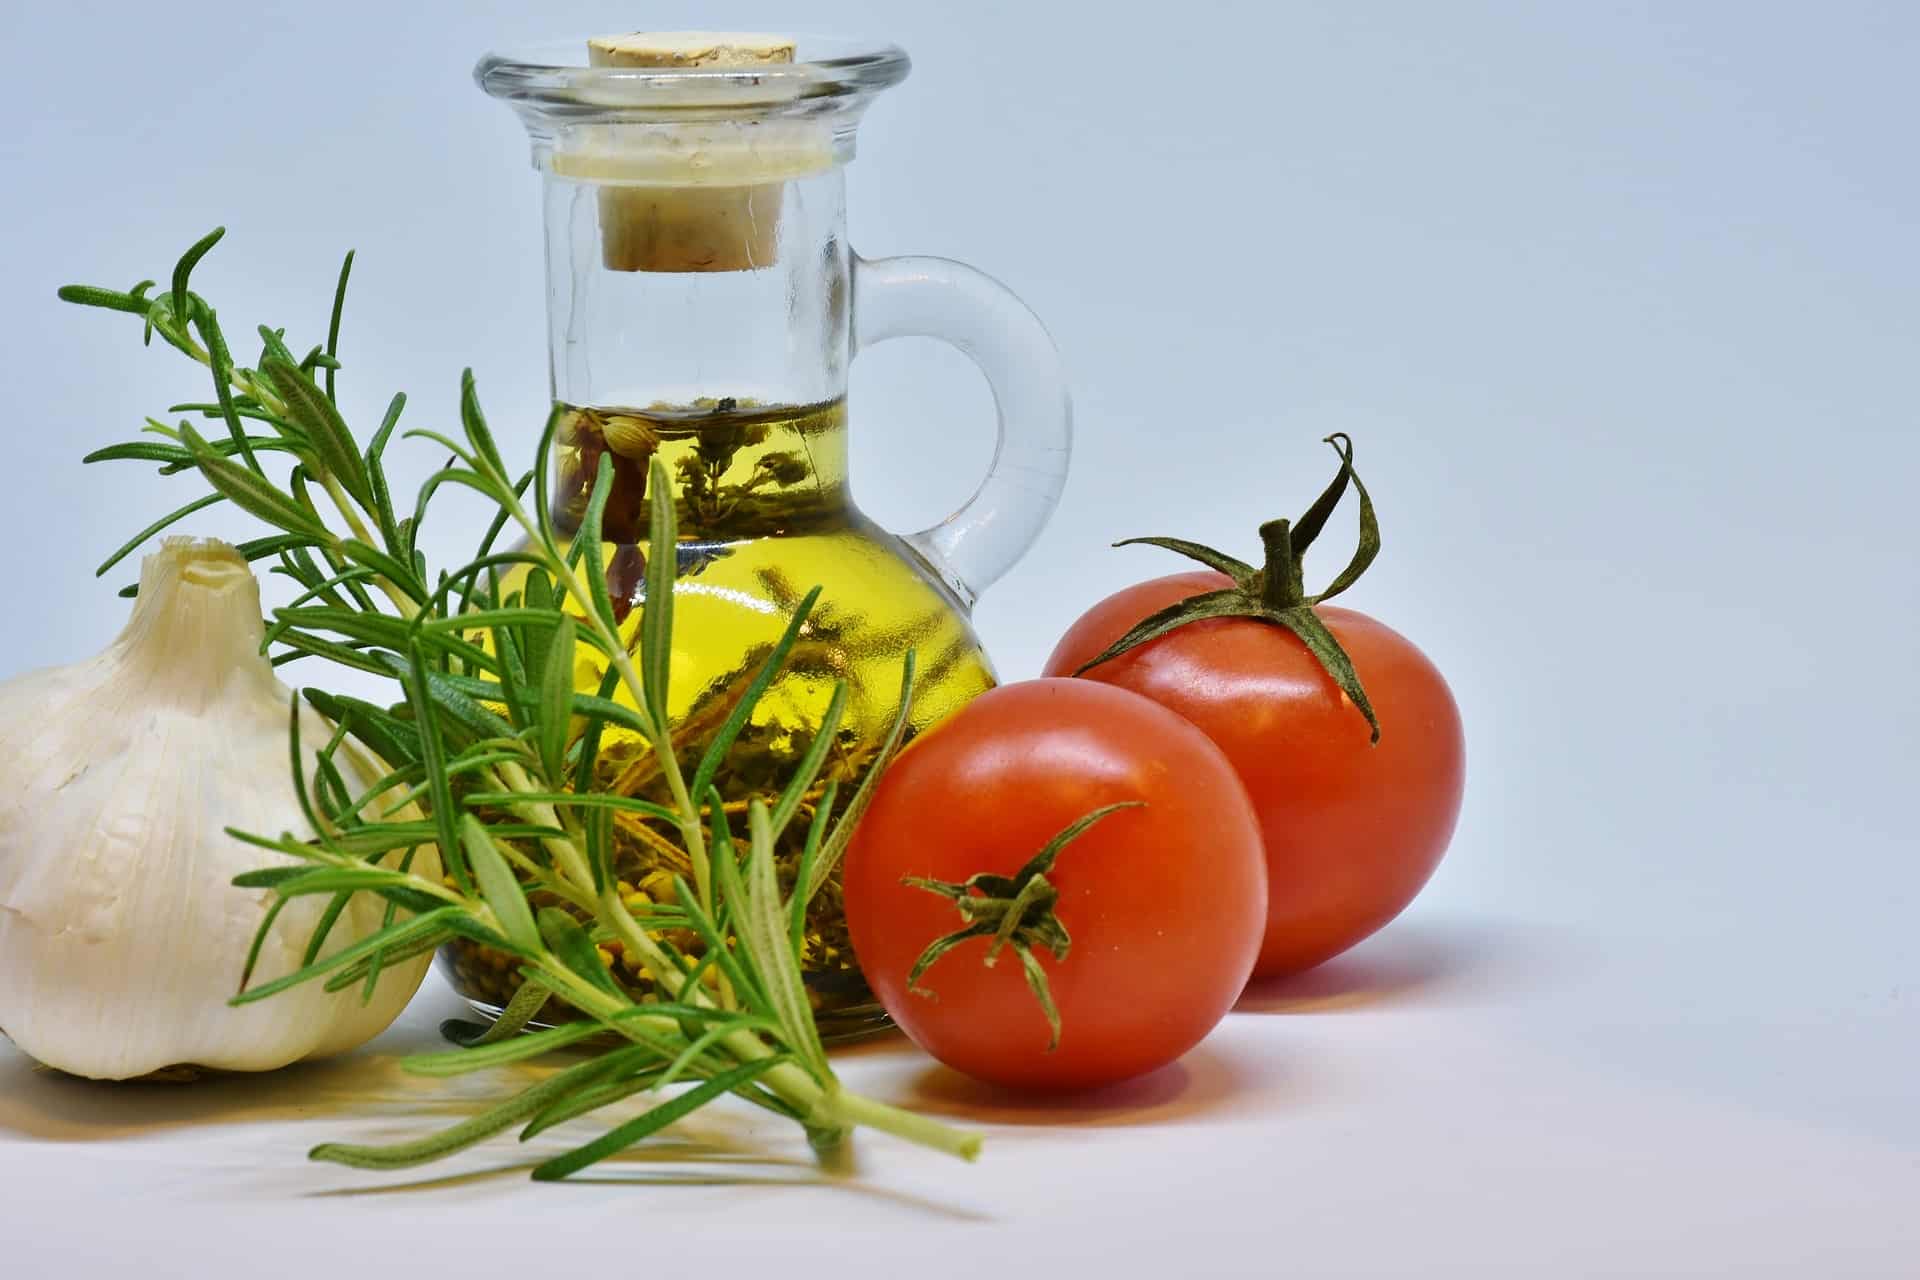 olive oil uses in cooking